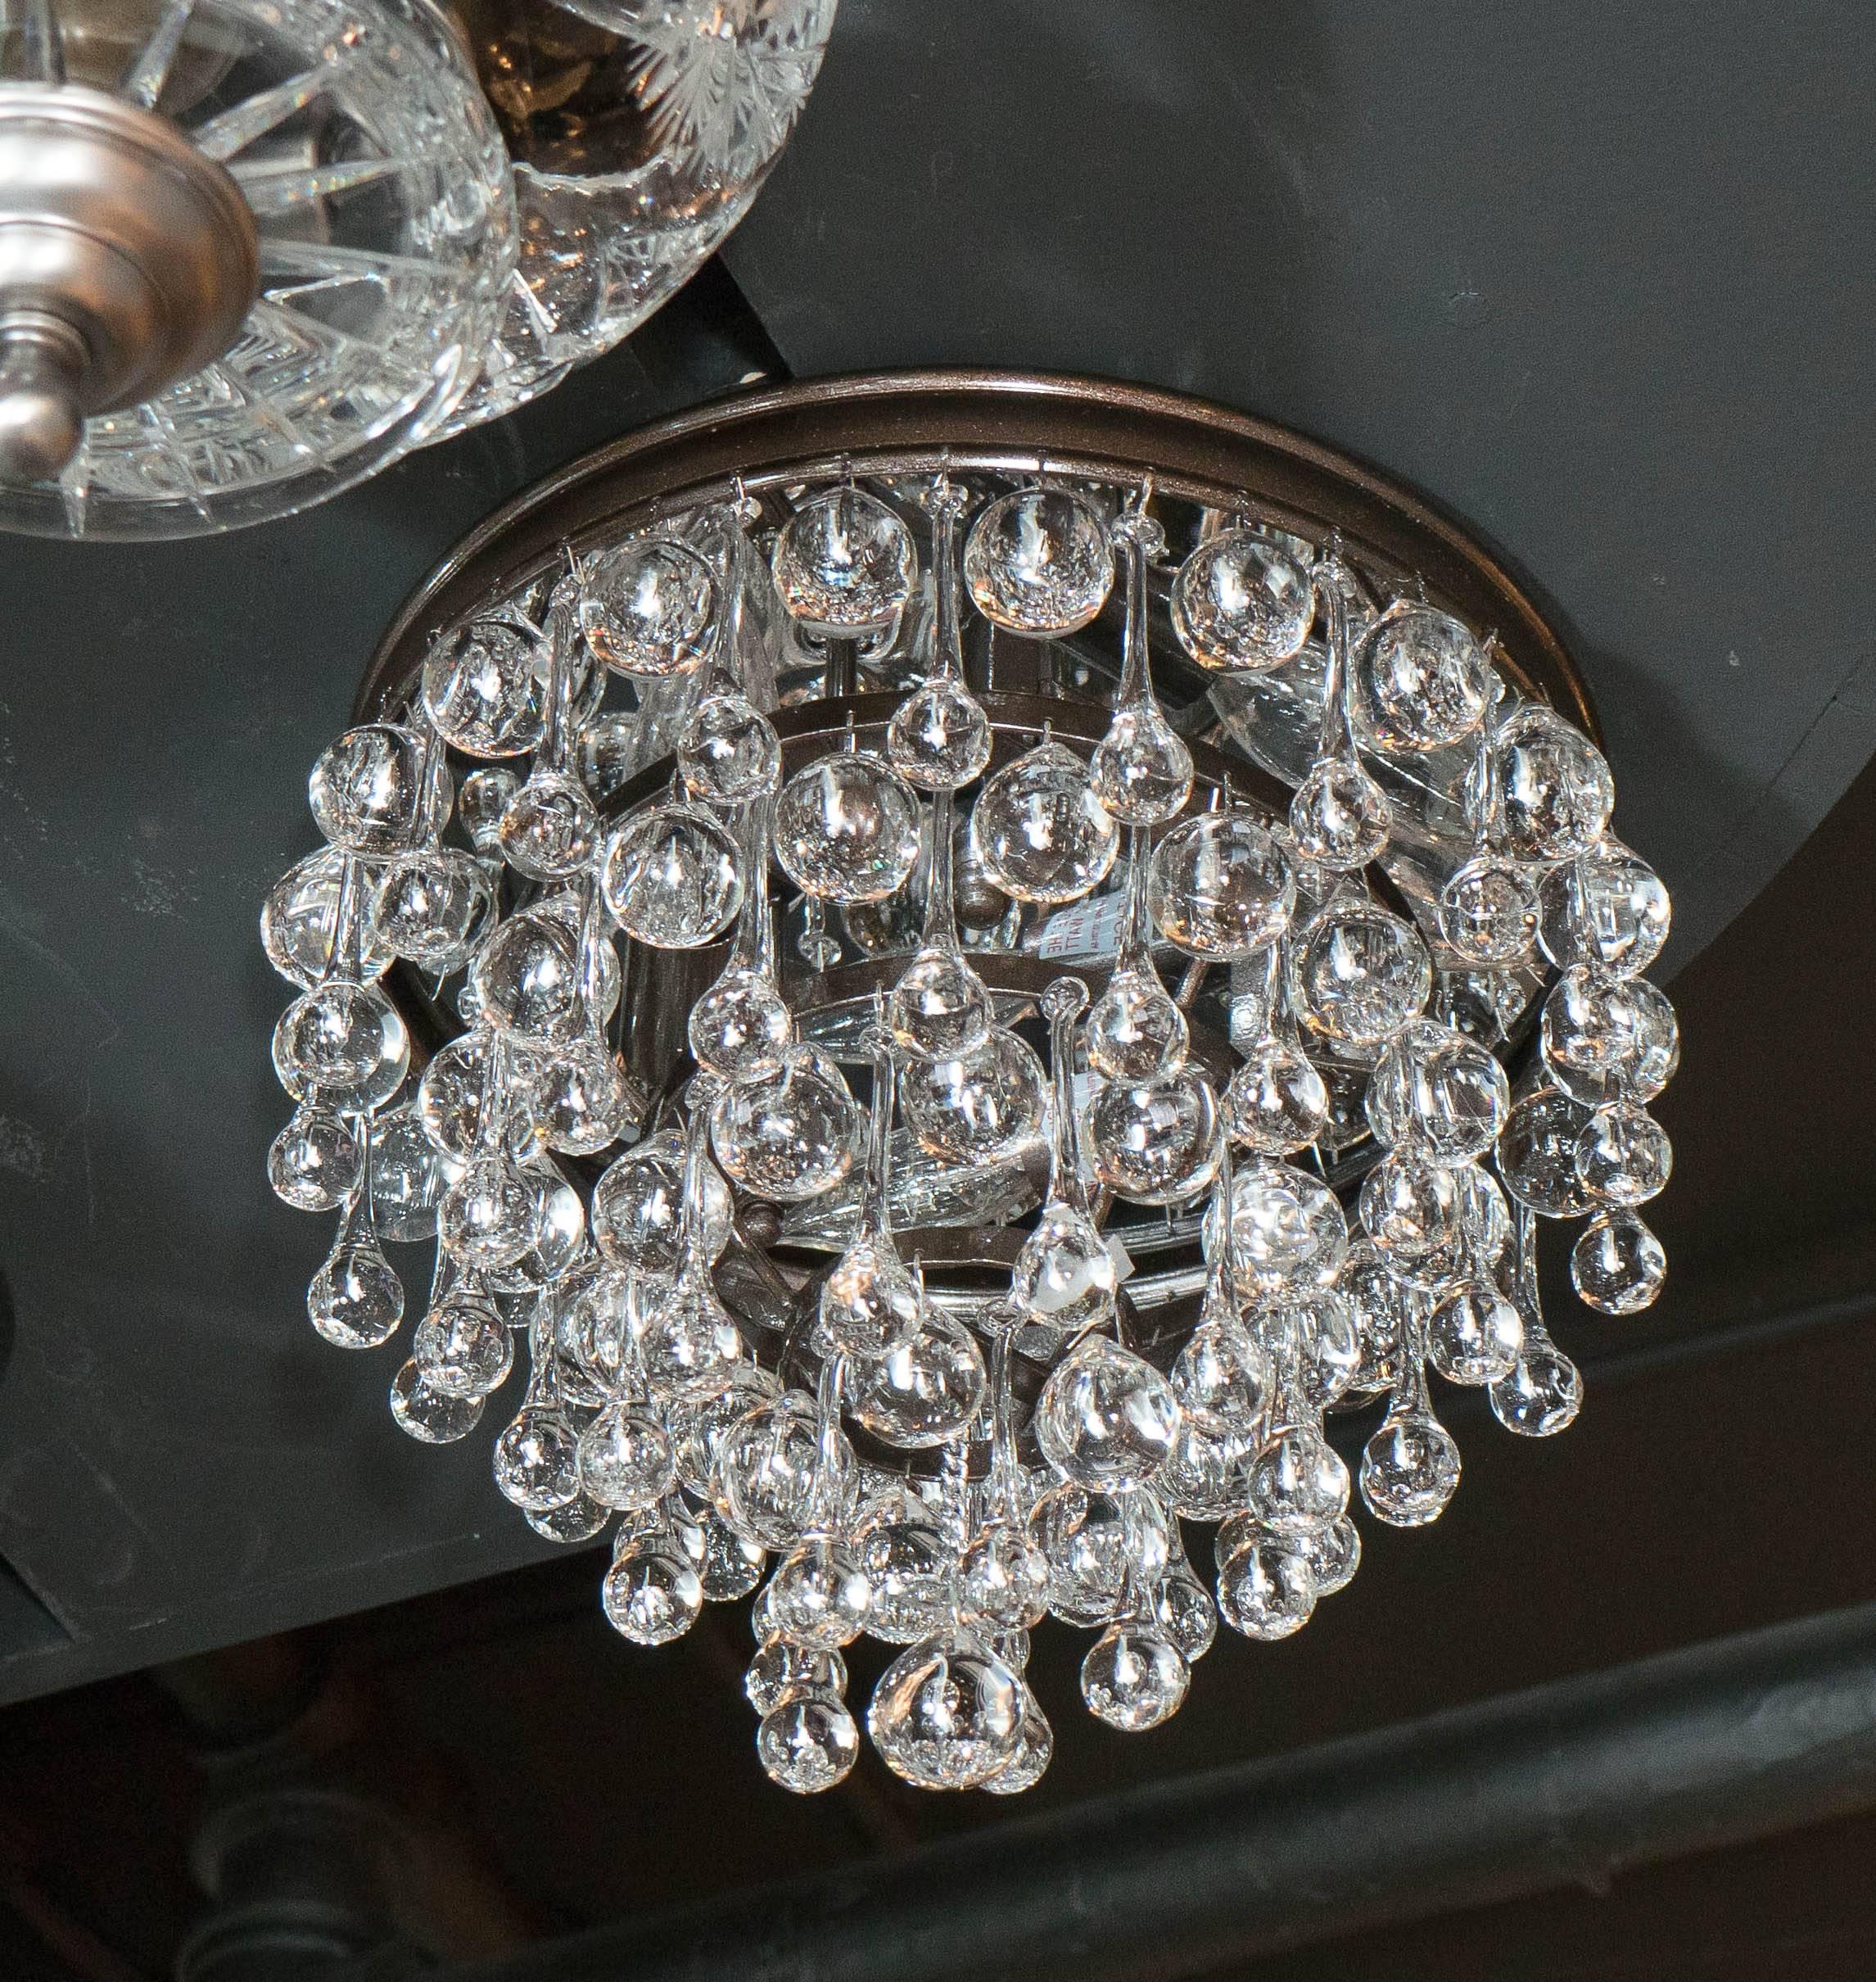 An elegant flush mount chandelier with contrasting crystal ball and teardrop glass segments in a radial pattern. The result is a very sparkling effect typical of Hollywood style and glamour. The fixture is chrome and the glass is handblown. This